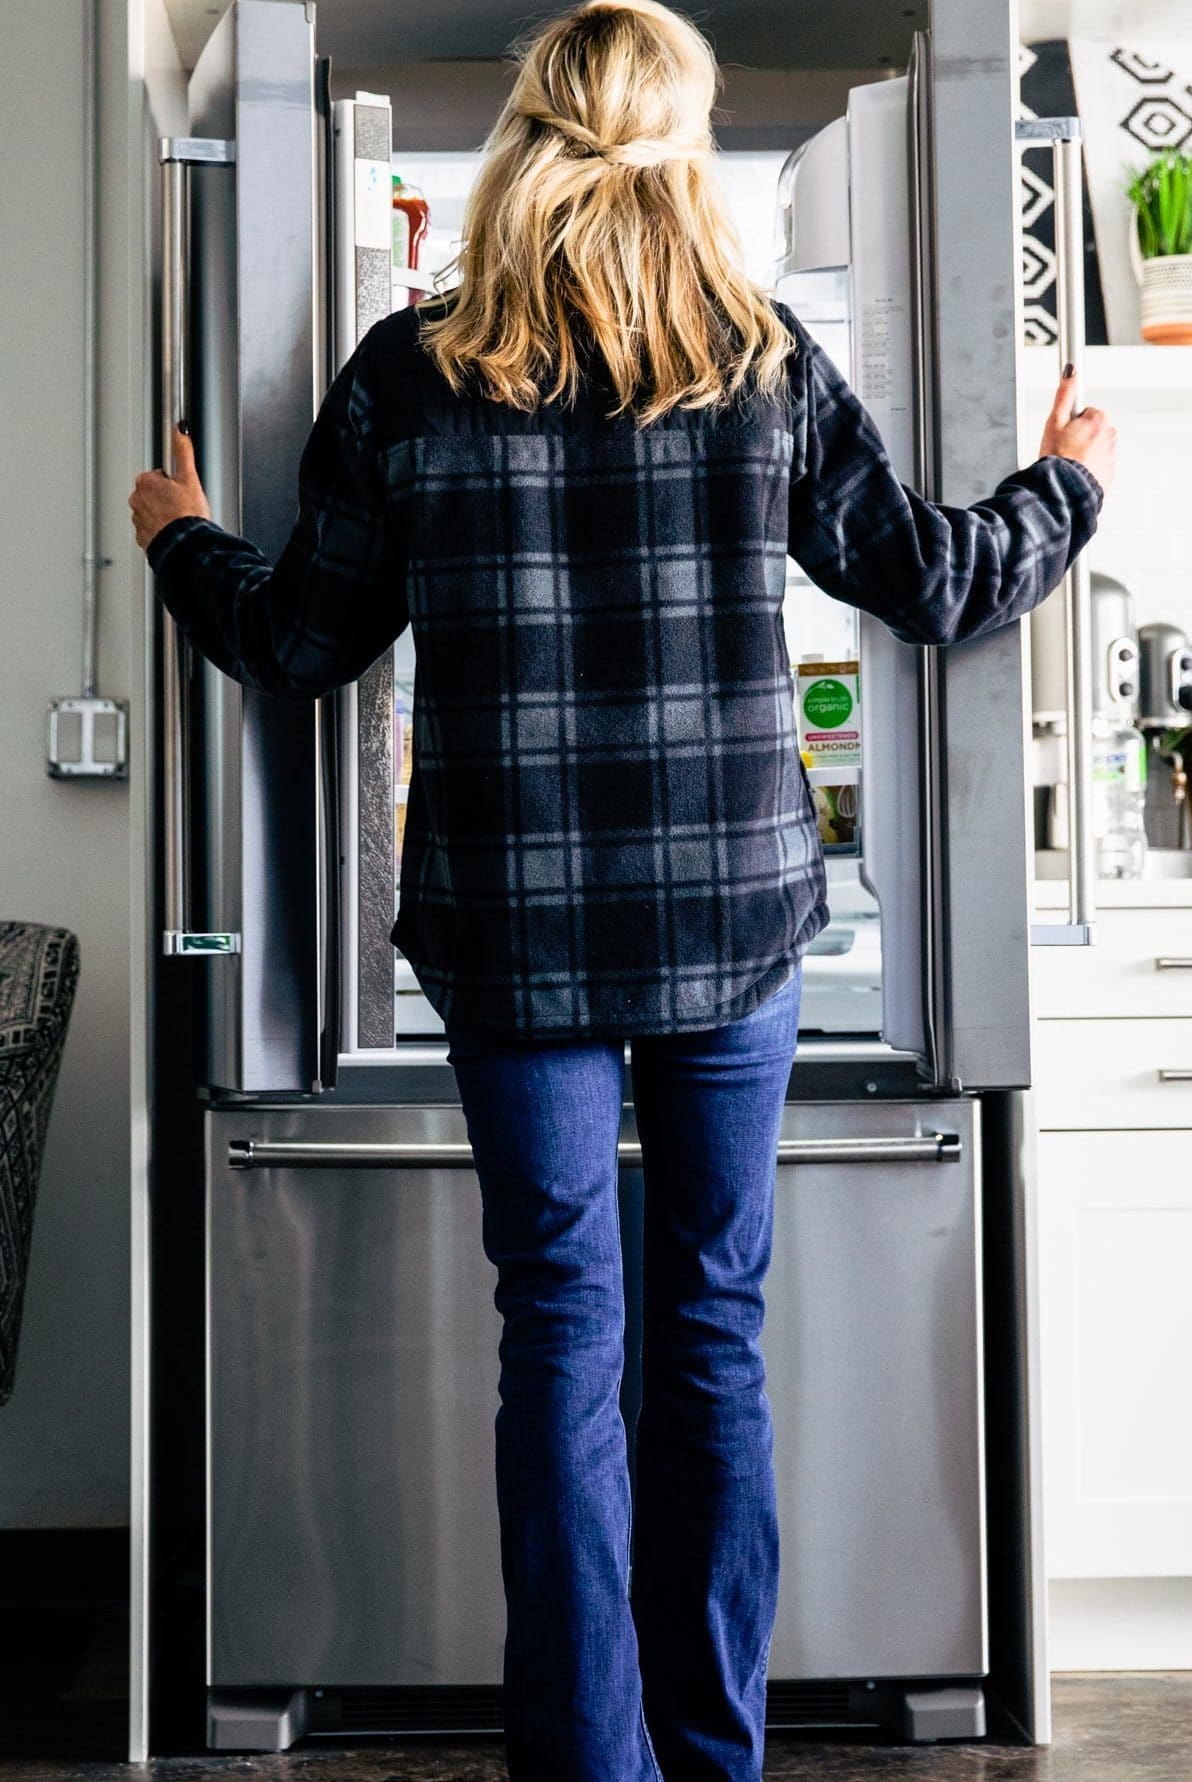 A woman standing in front of silver KitchenAid refrigerator with double doors open